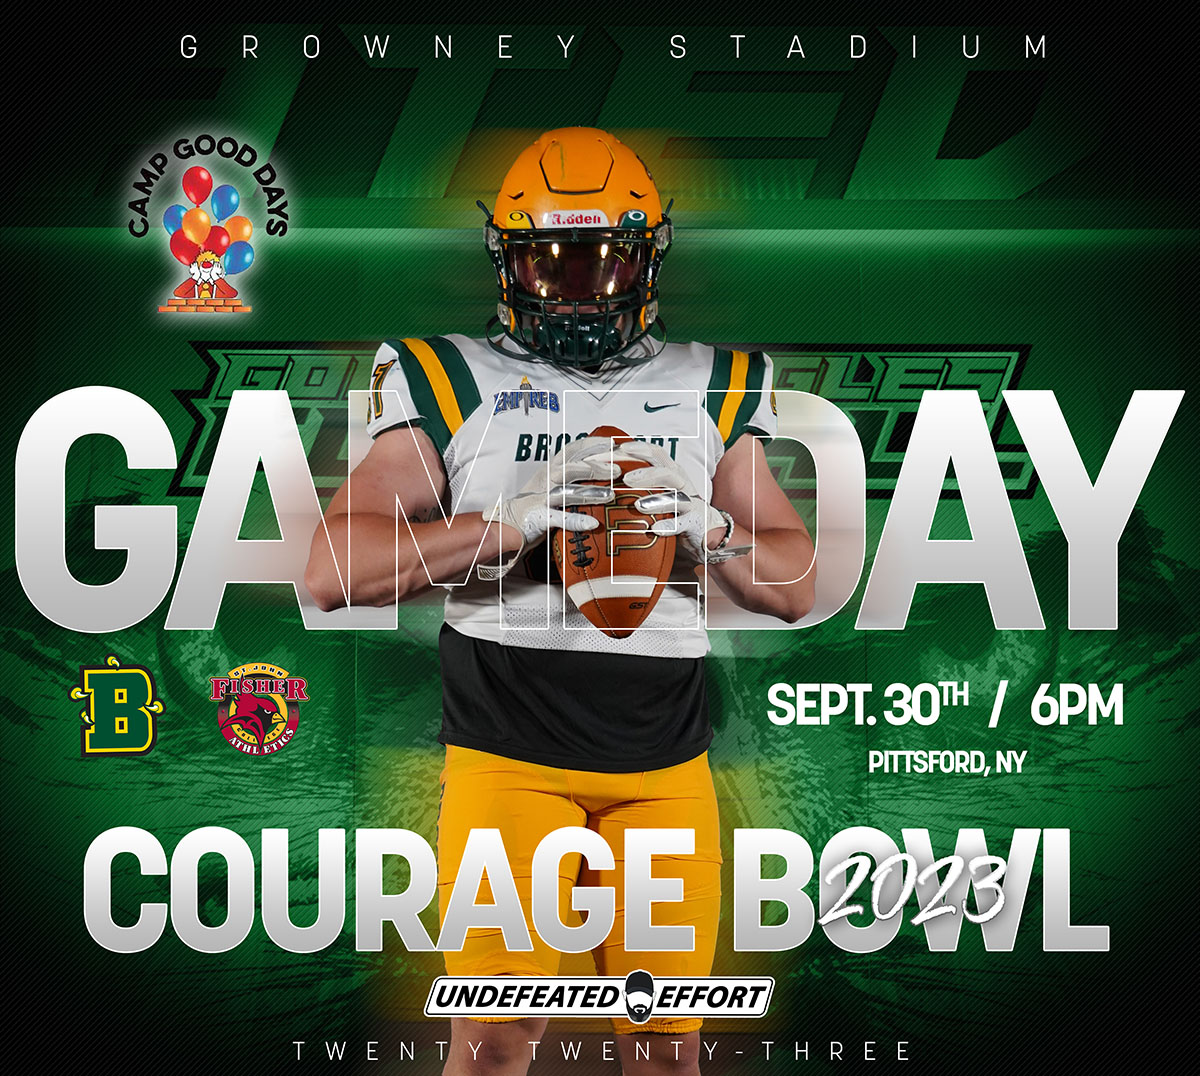 Gameday Brockport in the Courage Bowl